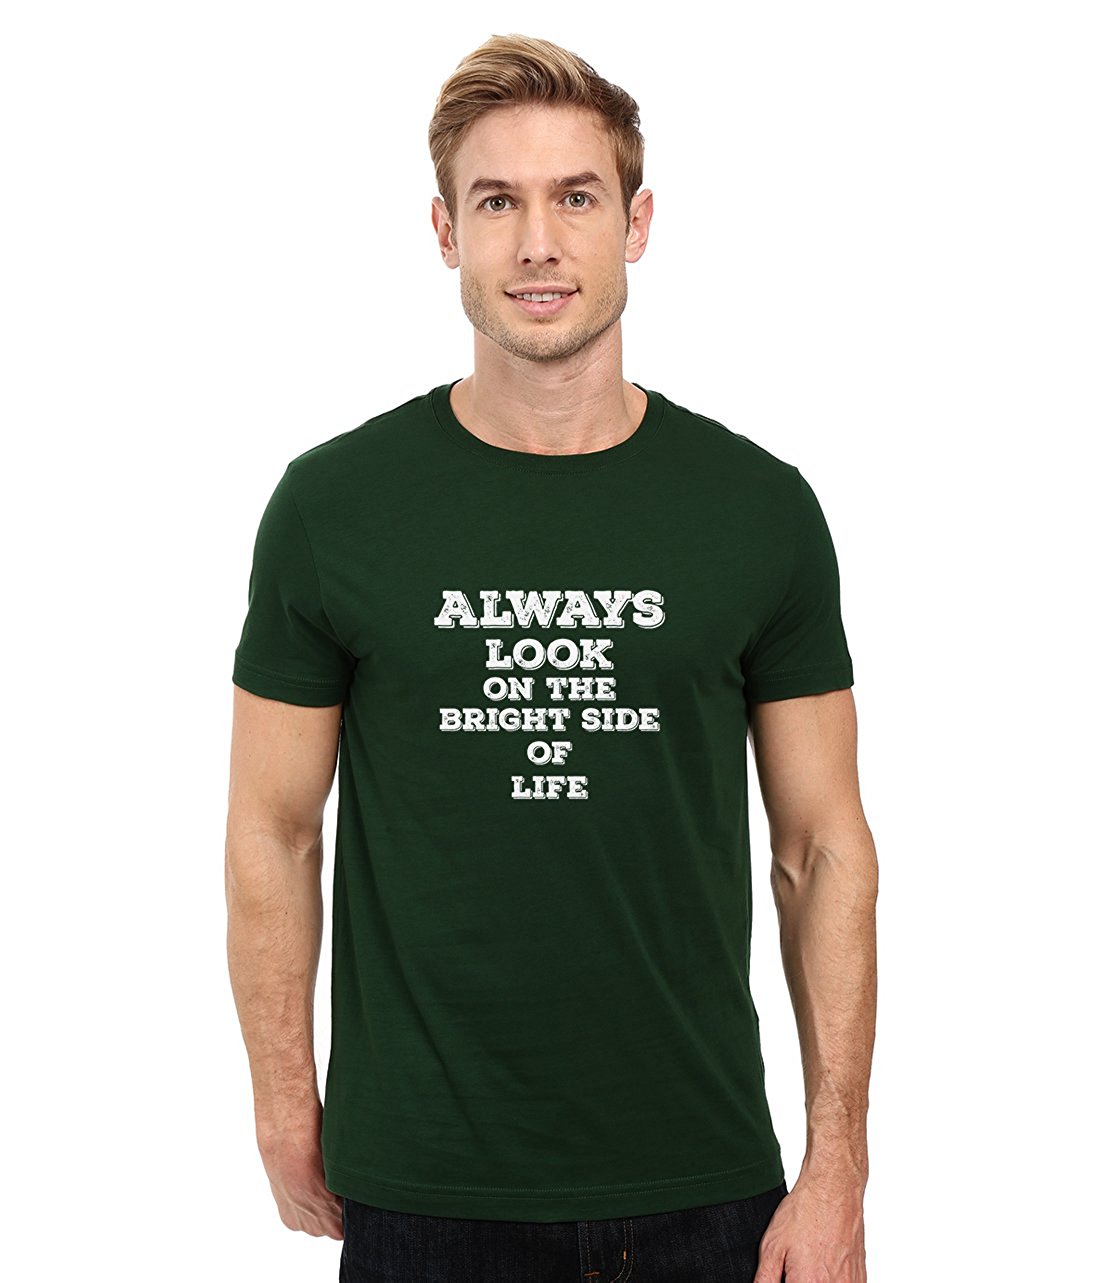 DOUBLE F ROUND NECK HALF SLEEVE ALWAYS LOOK BRIGHT SIDE OF LIFE PRINTED WITH 08 COLORS PRINTED T-SHIRTS 